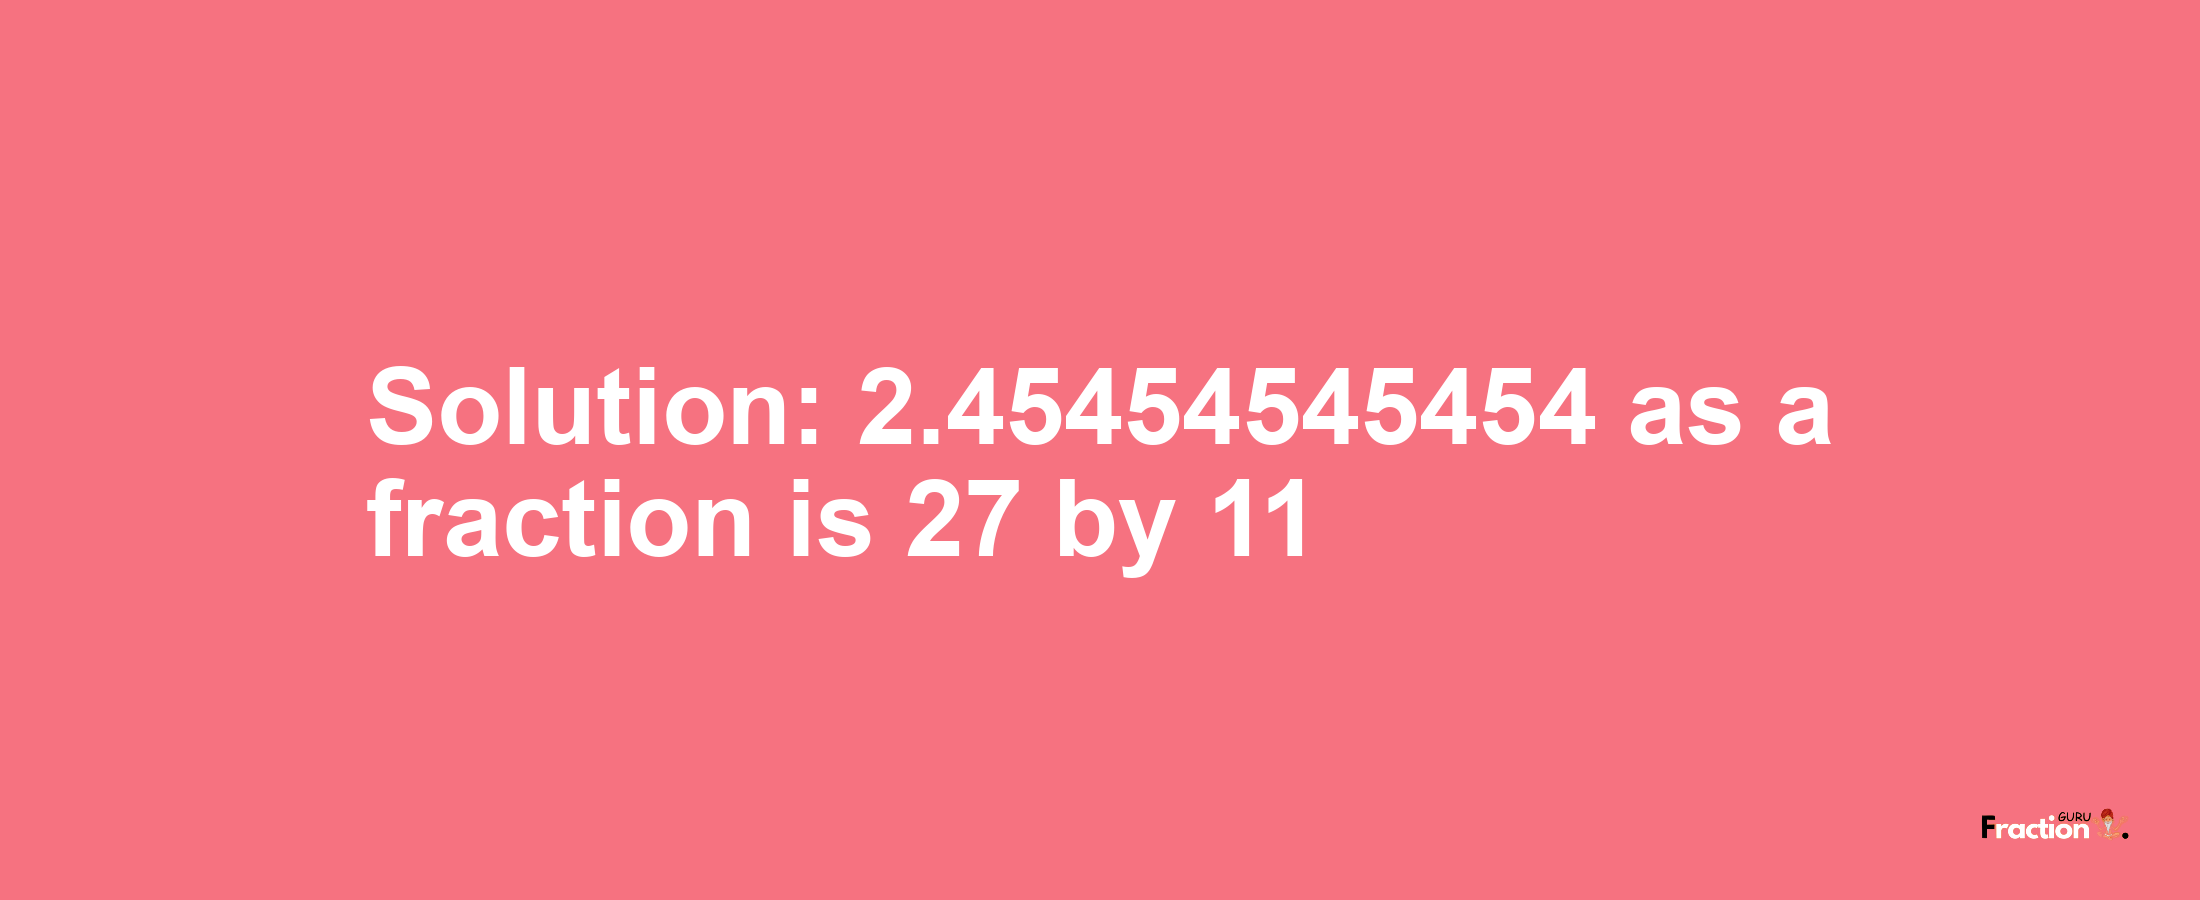 Solution:2.45454545454 as a fraction is 27/11